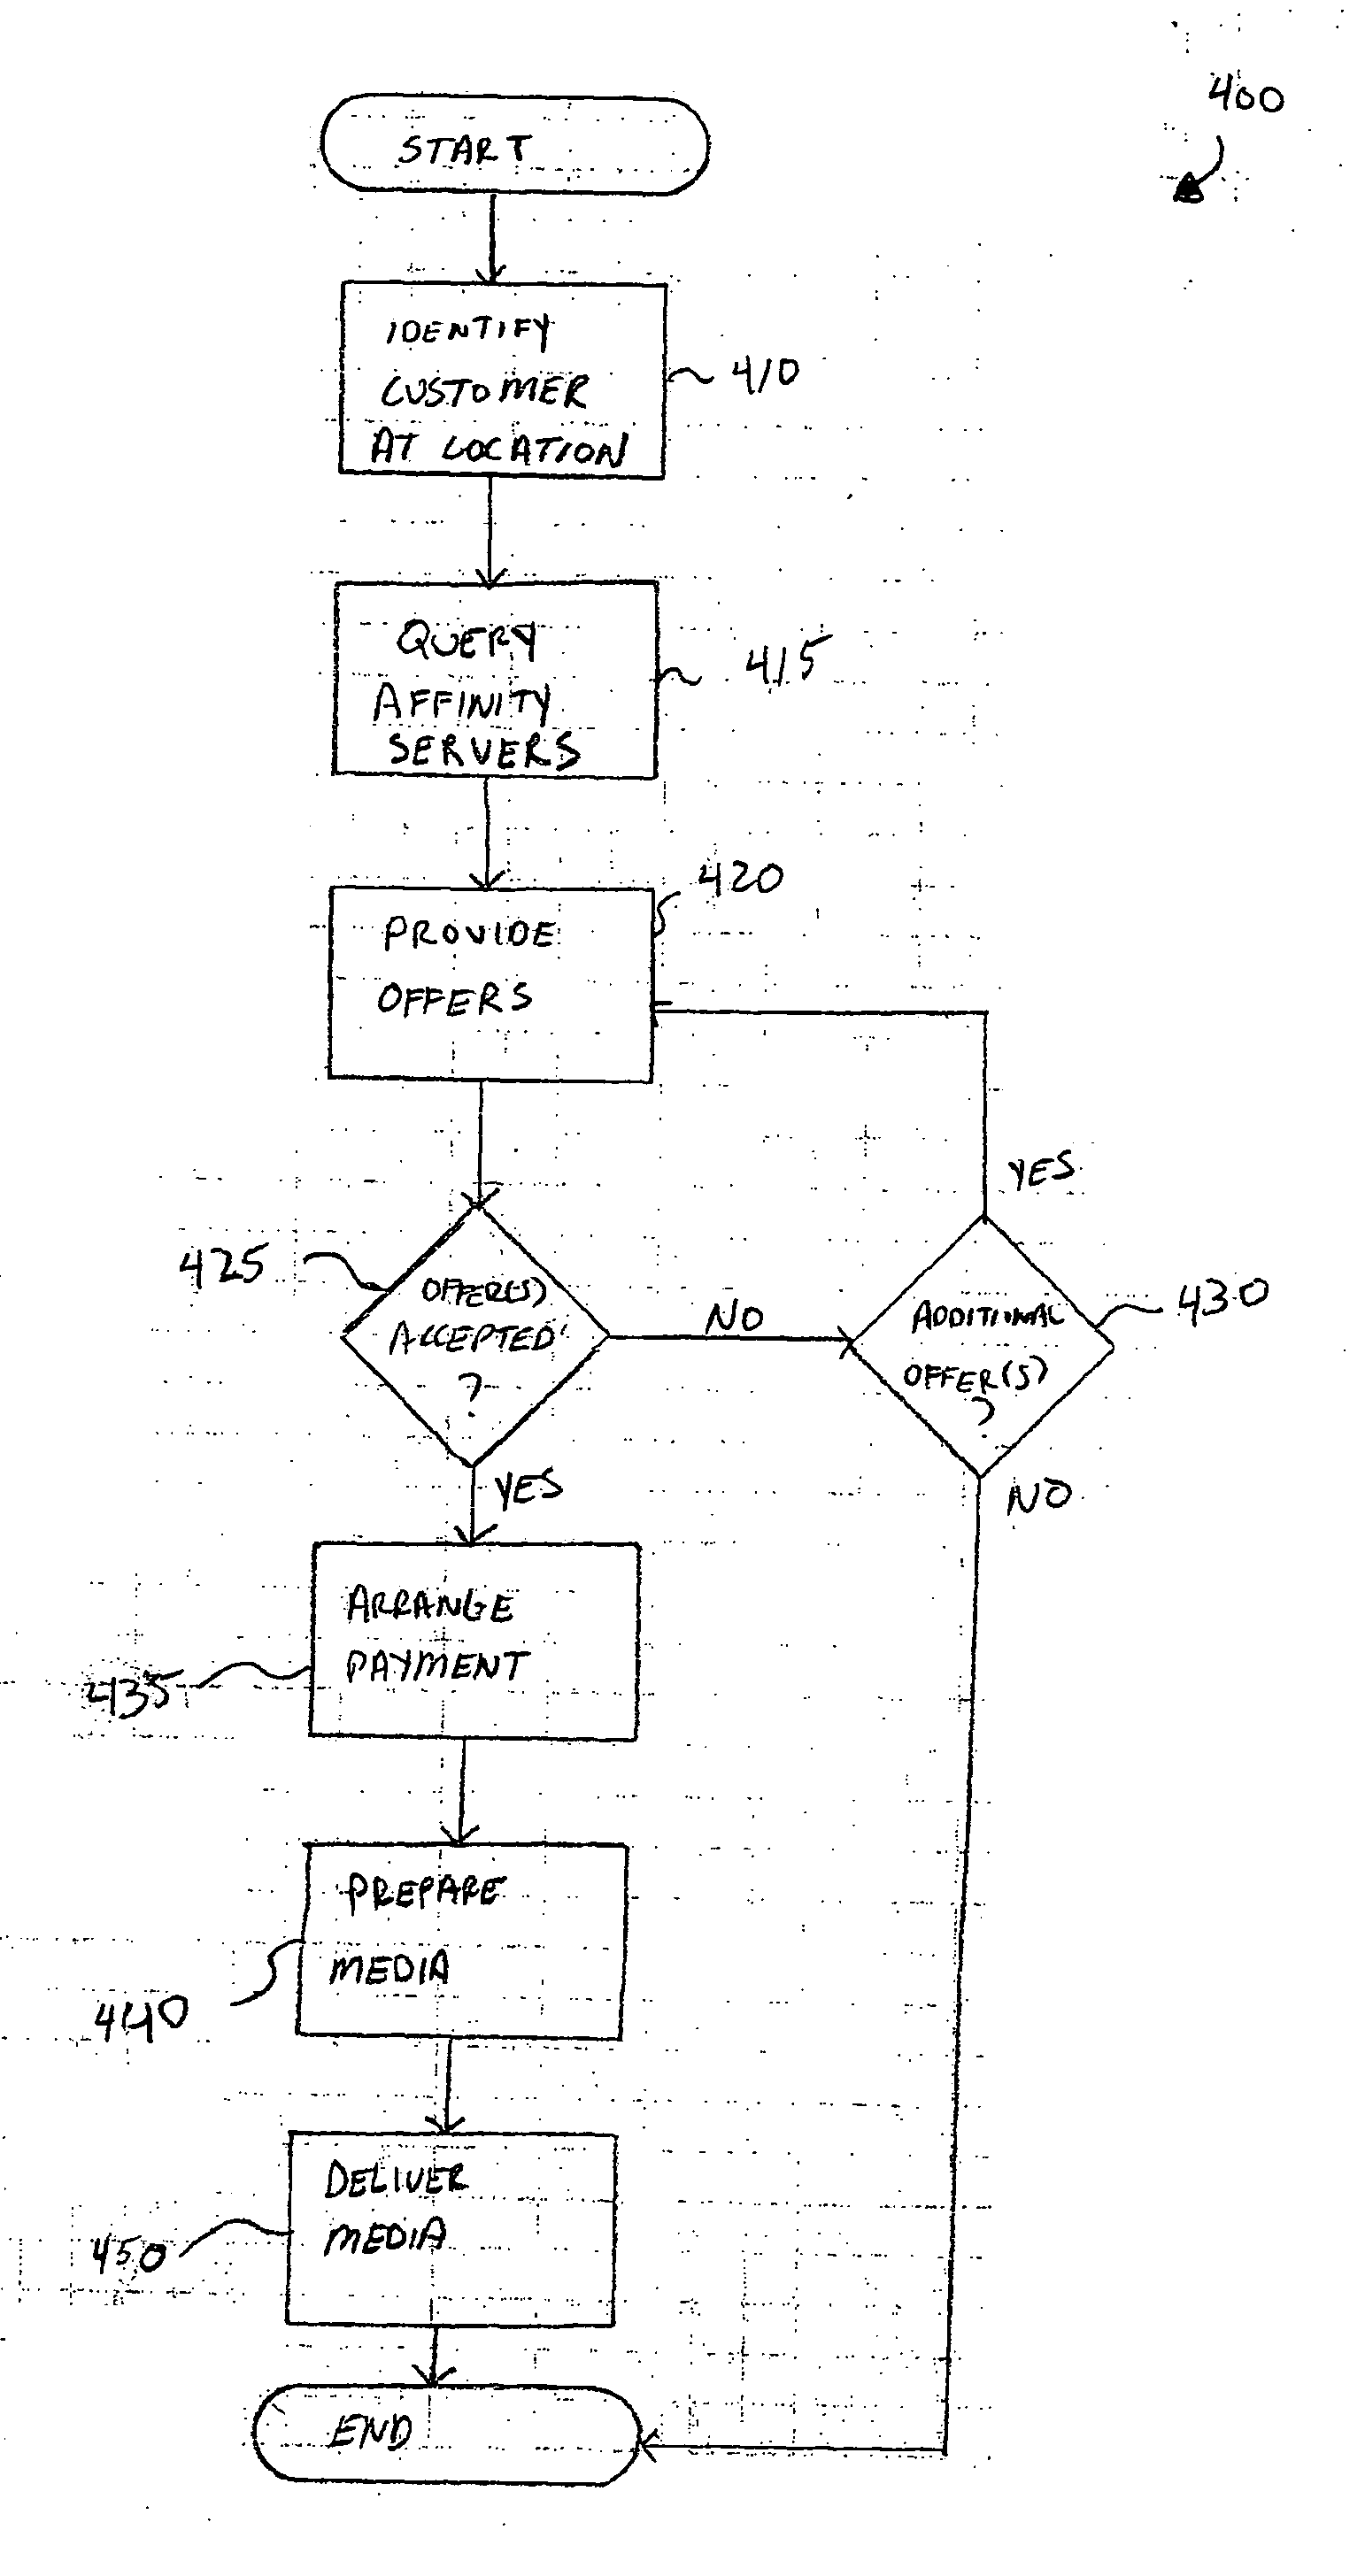 System and method for on-demand delivery of media products